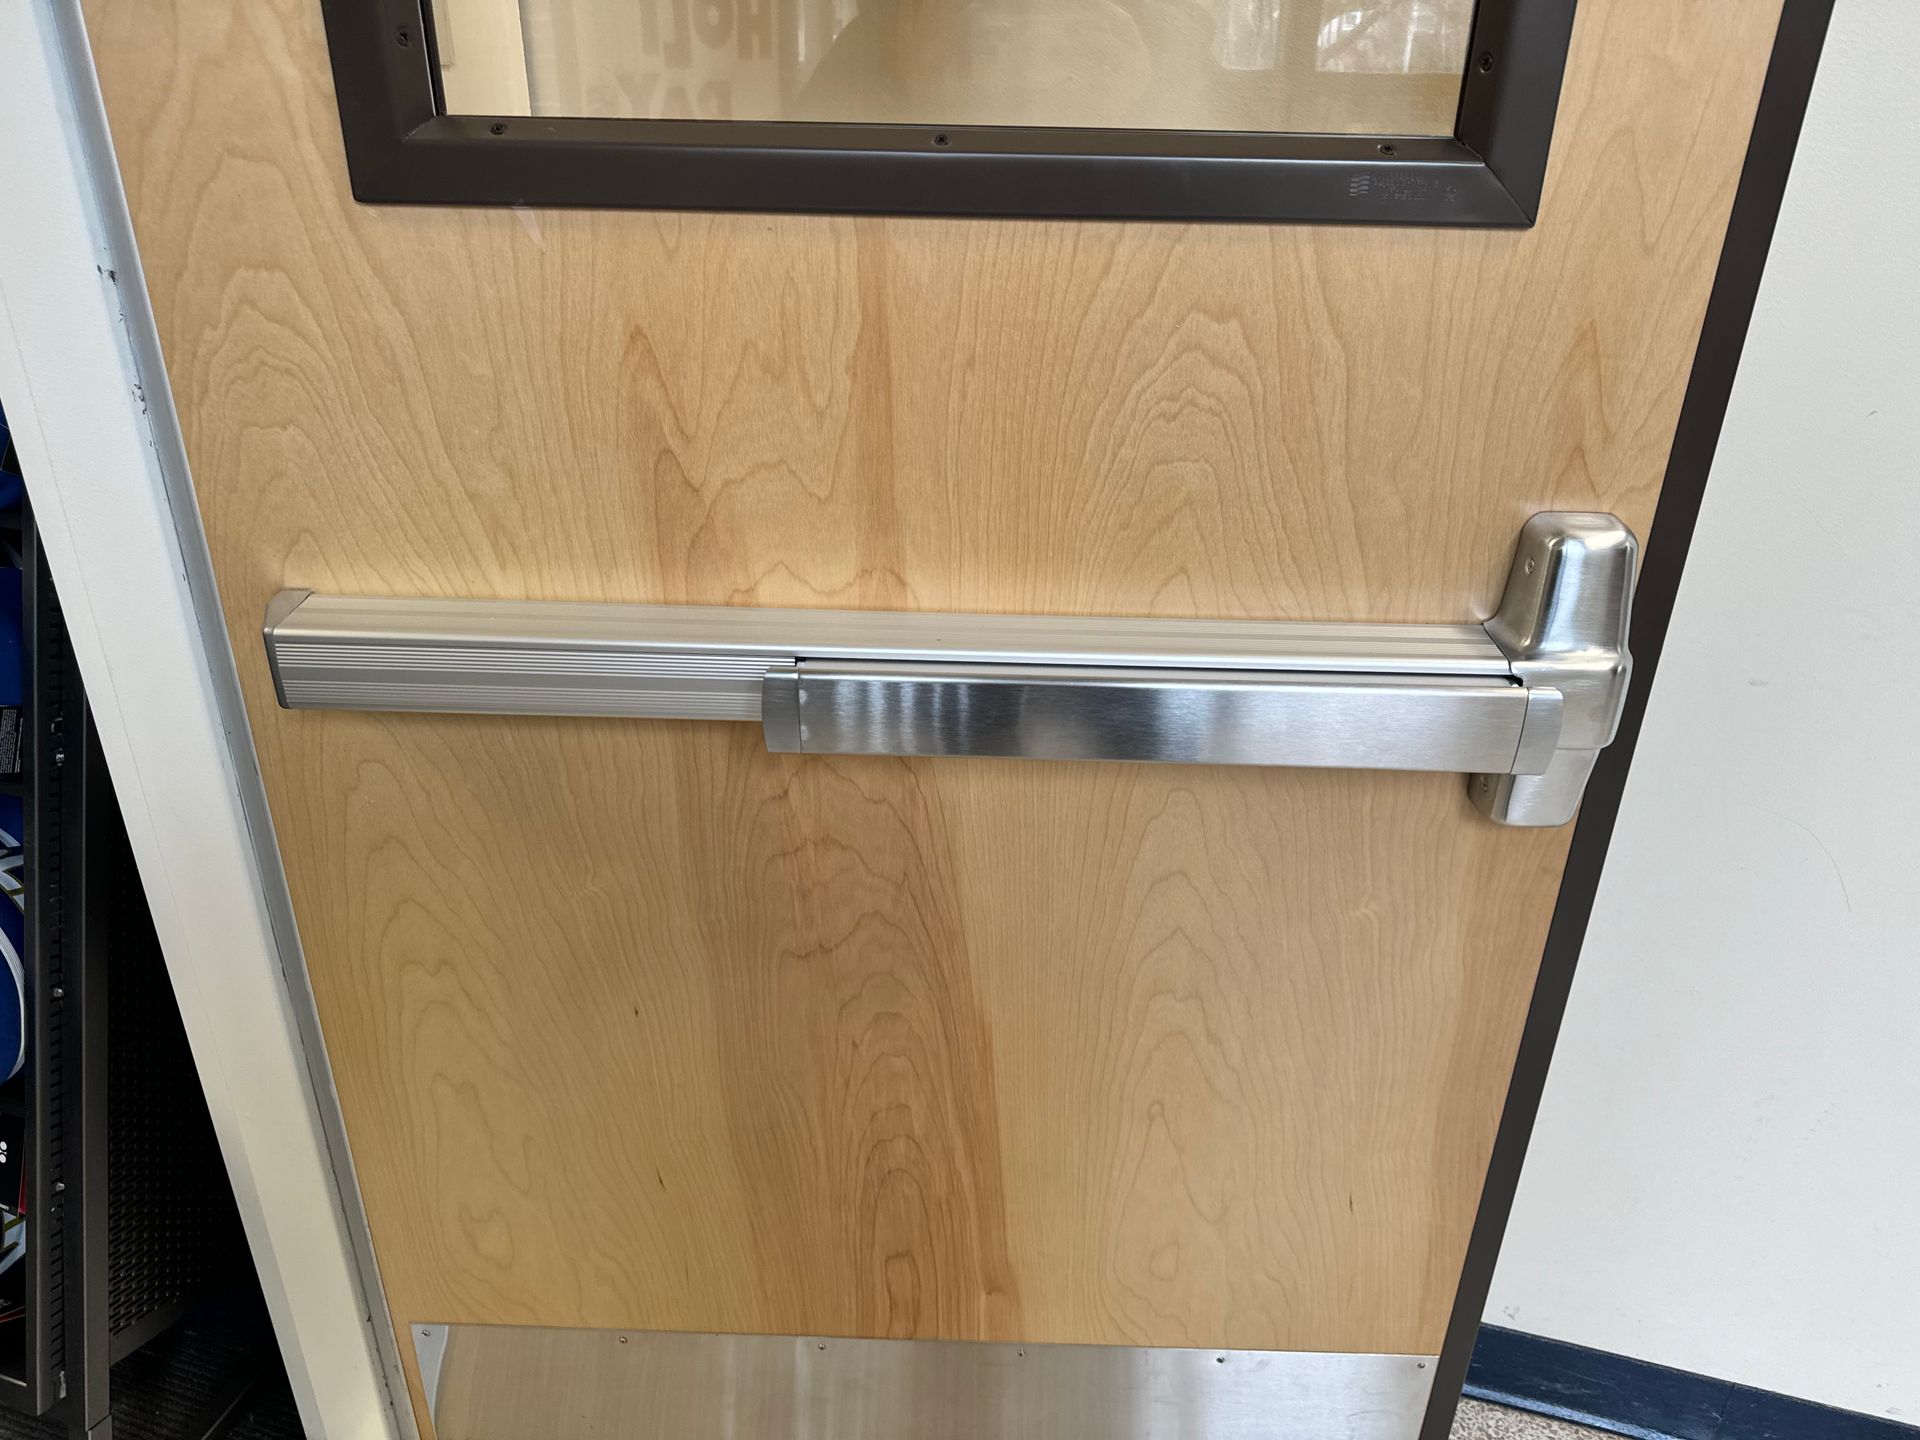 an exit door with a stainless steel push bar panic device.